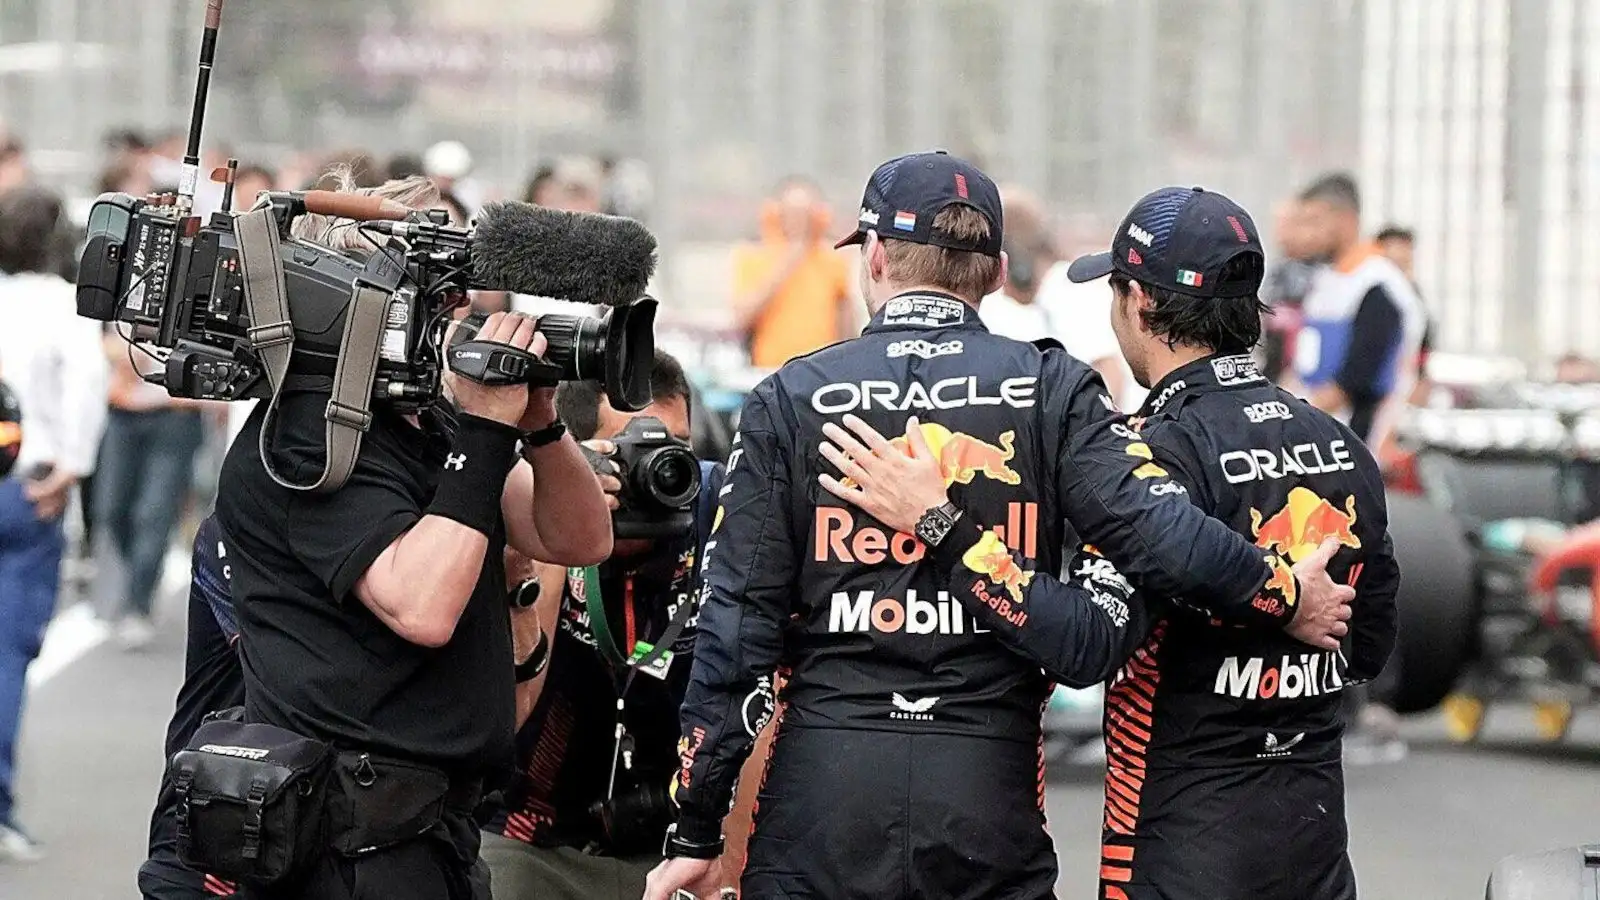 Red Bull duo Max Verstappen and Sergio Perez pose for the camera. Drive to Survive